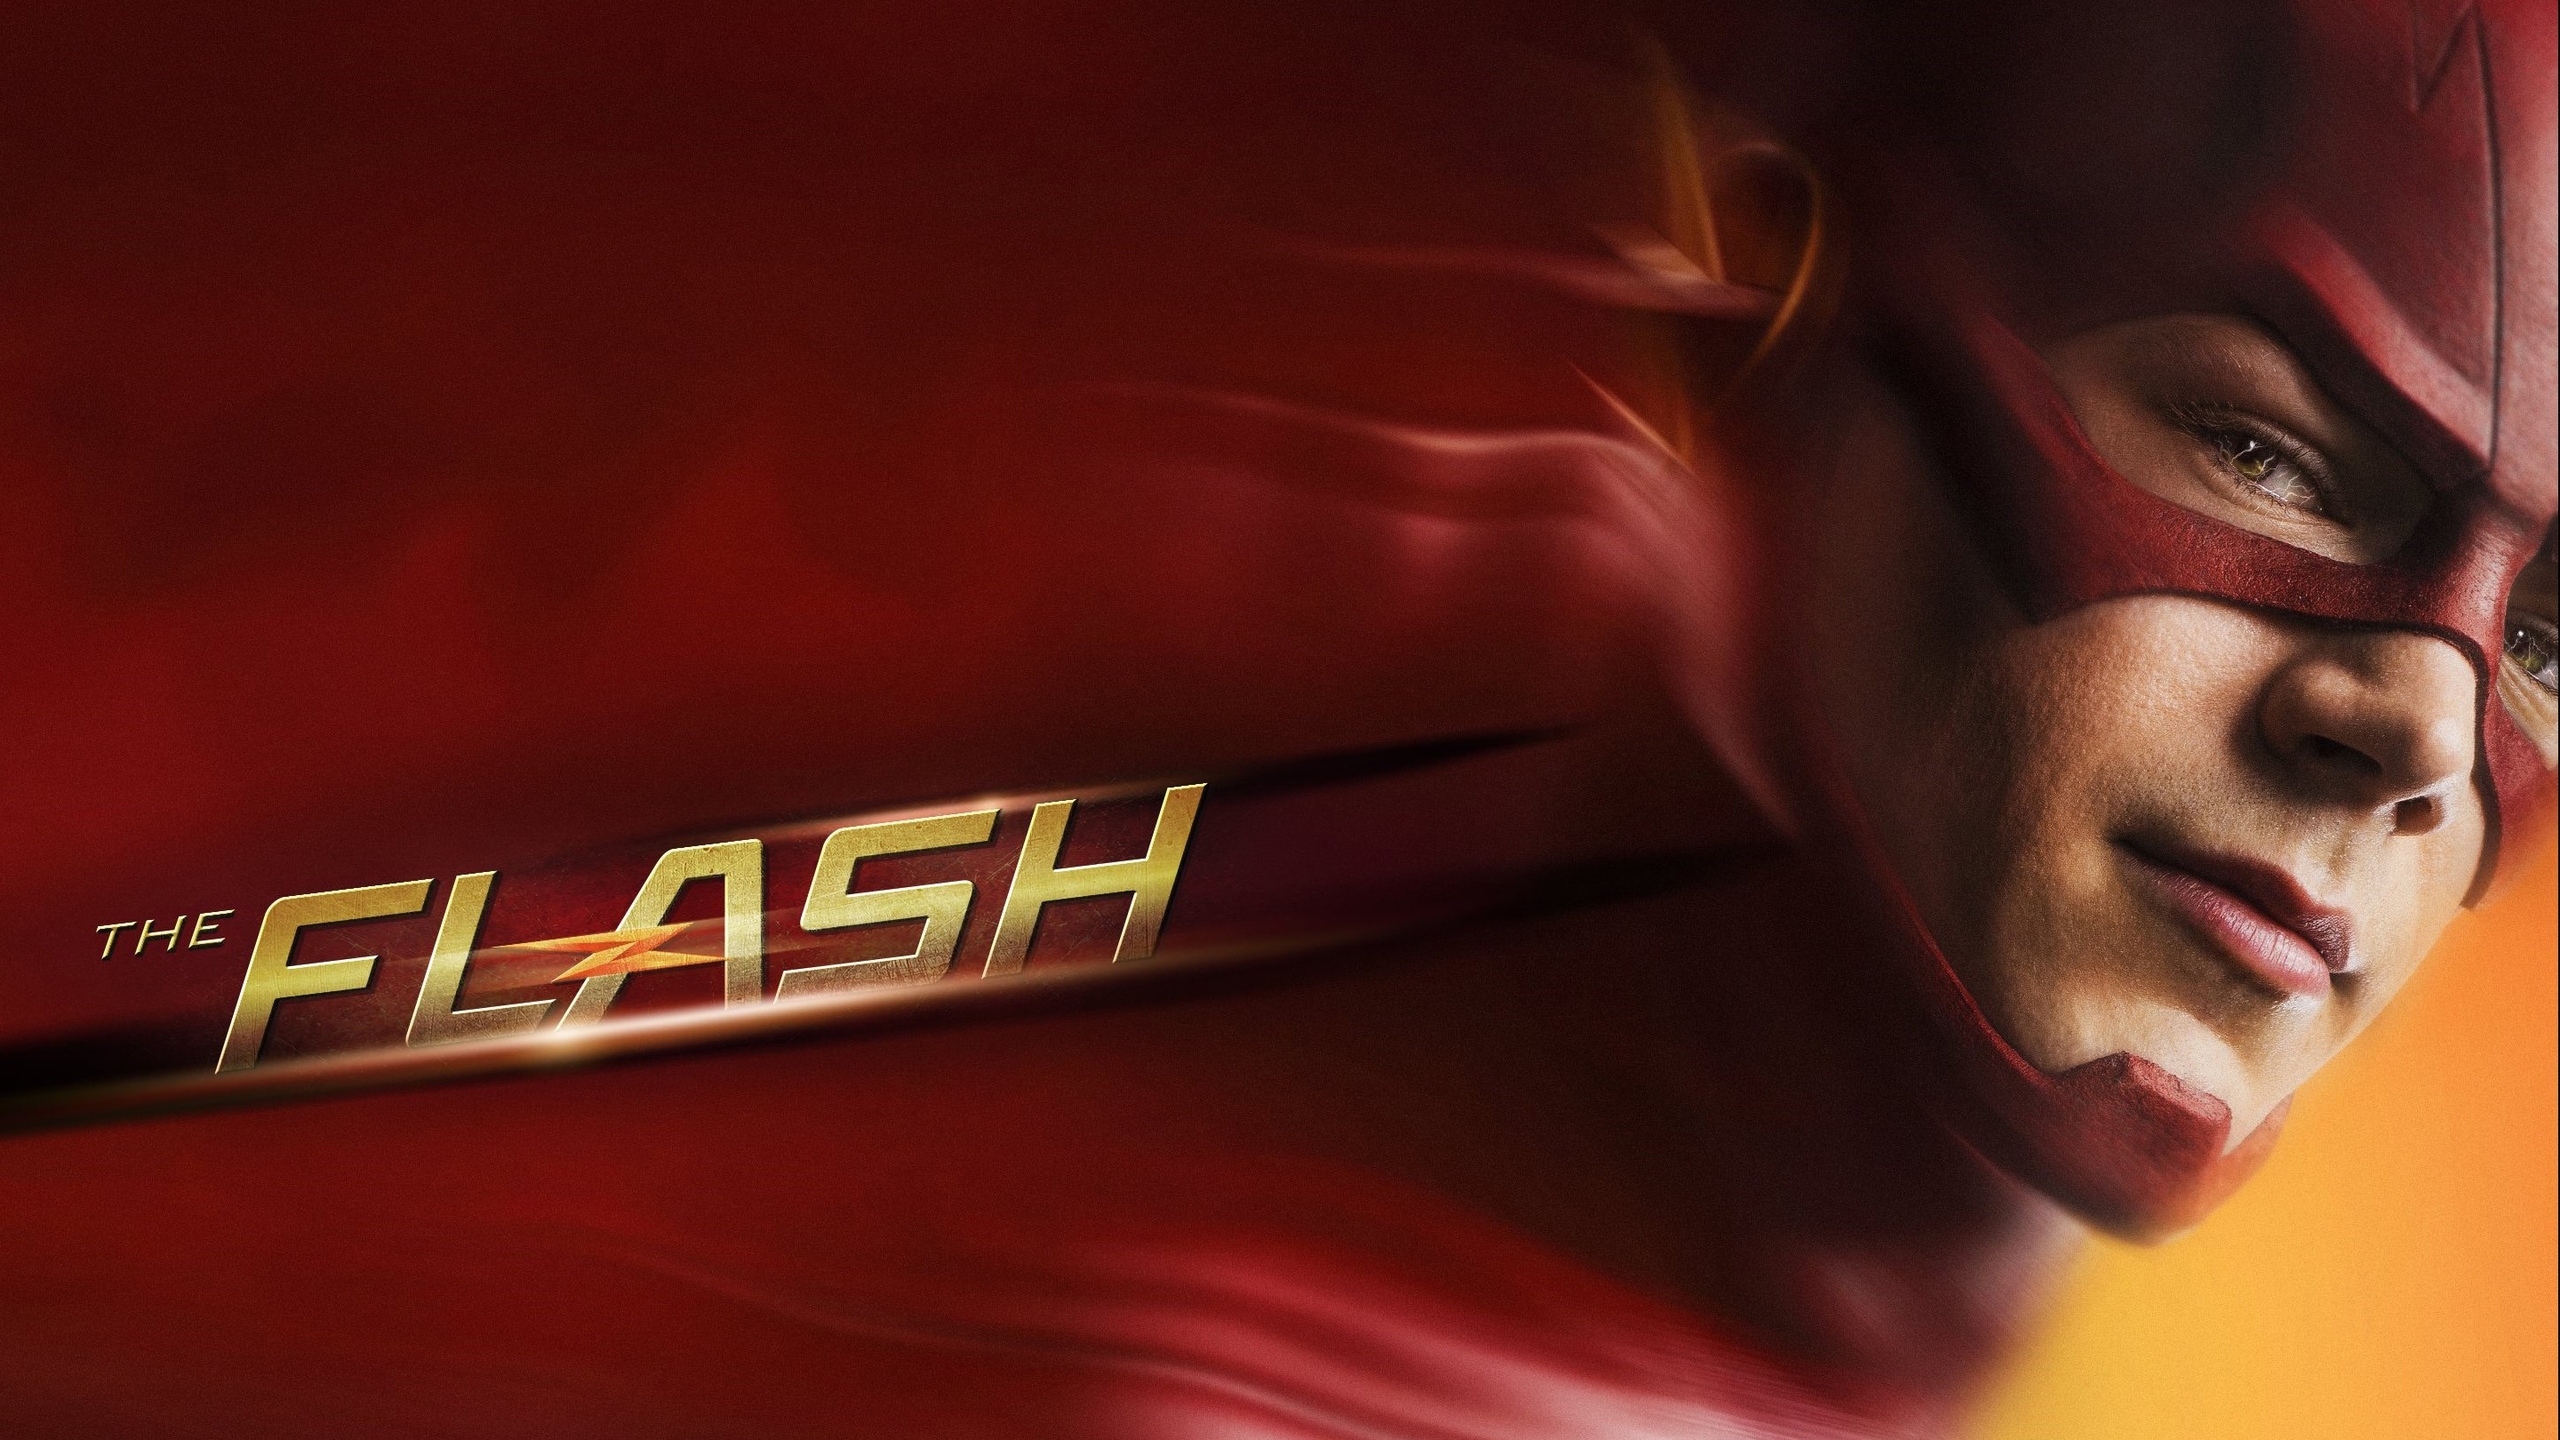 The Flash TV Series for 2560x1440 HDTV resolution